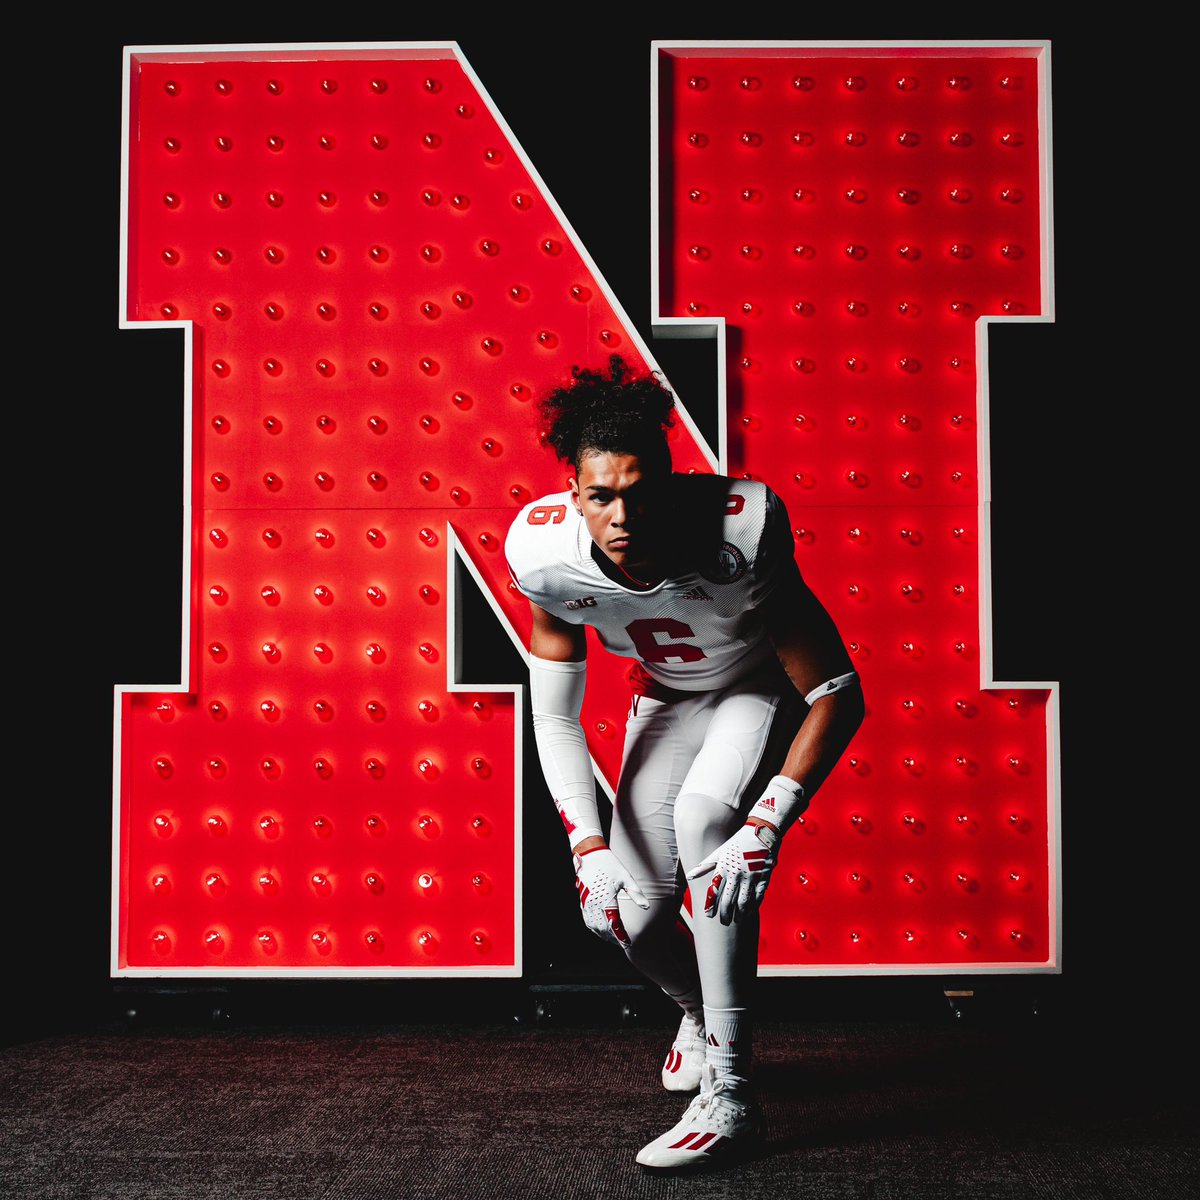 I just want to thank Nebraska staff for making my weekend so special. My family and I had a great time and had a lot of fun. I want to thank @Coach_Knighton for the great talk and going over things to make me a better player. @evancooper2 @CoachMattRhule @HuskerCoachTW